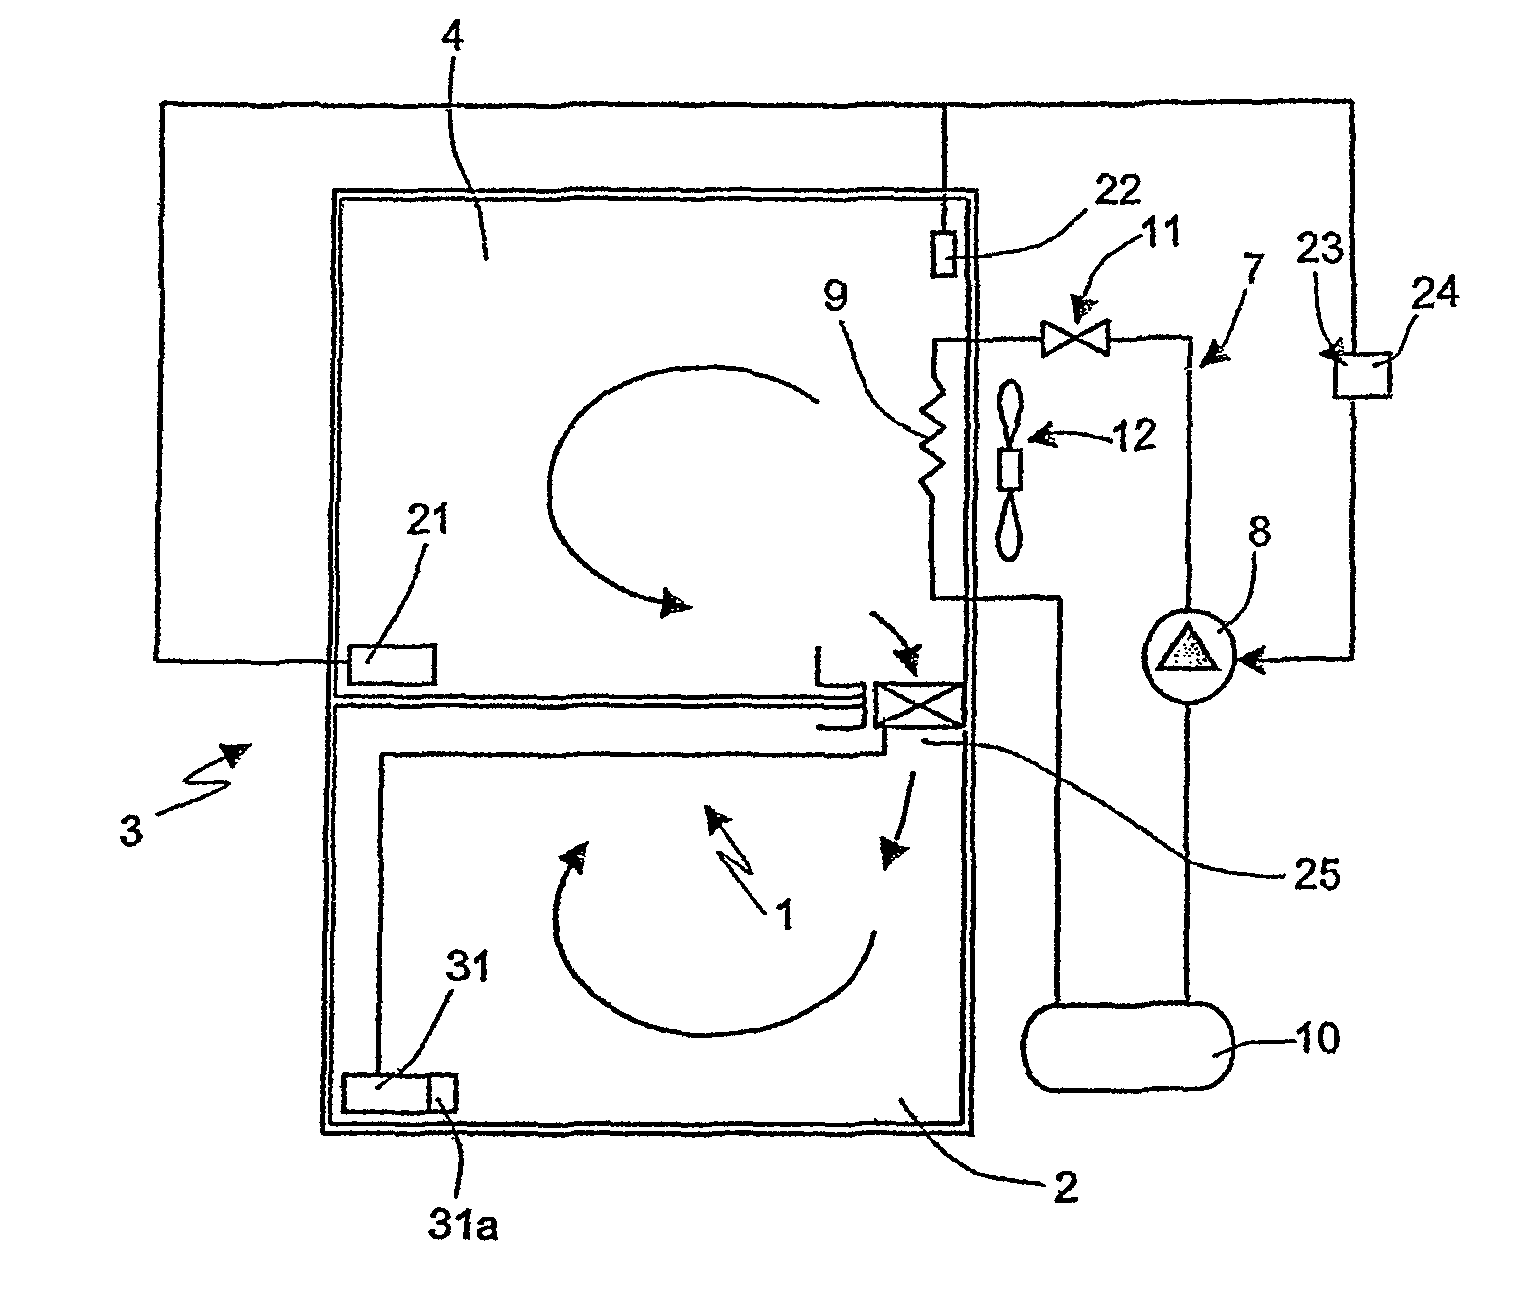 Device and method for controlling the temperature inside a refrigerating unit of a combined refrigerator-freezer